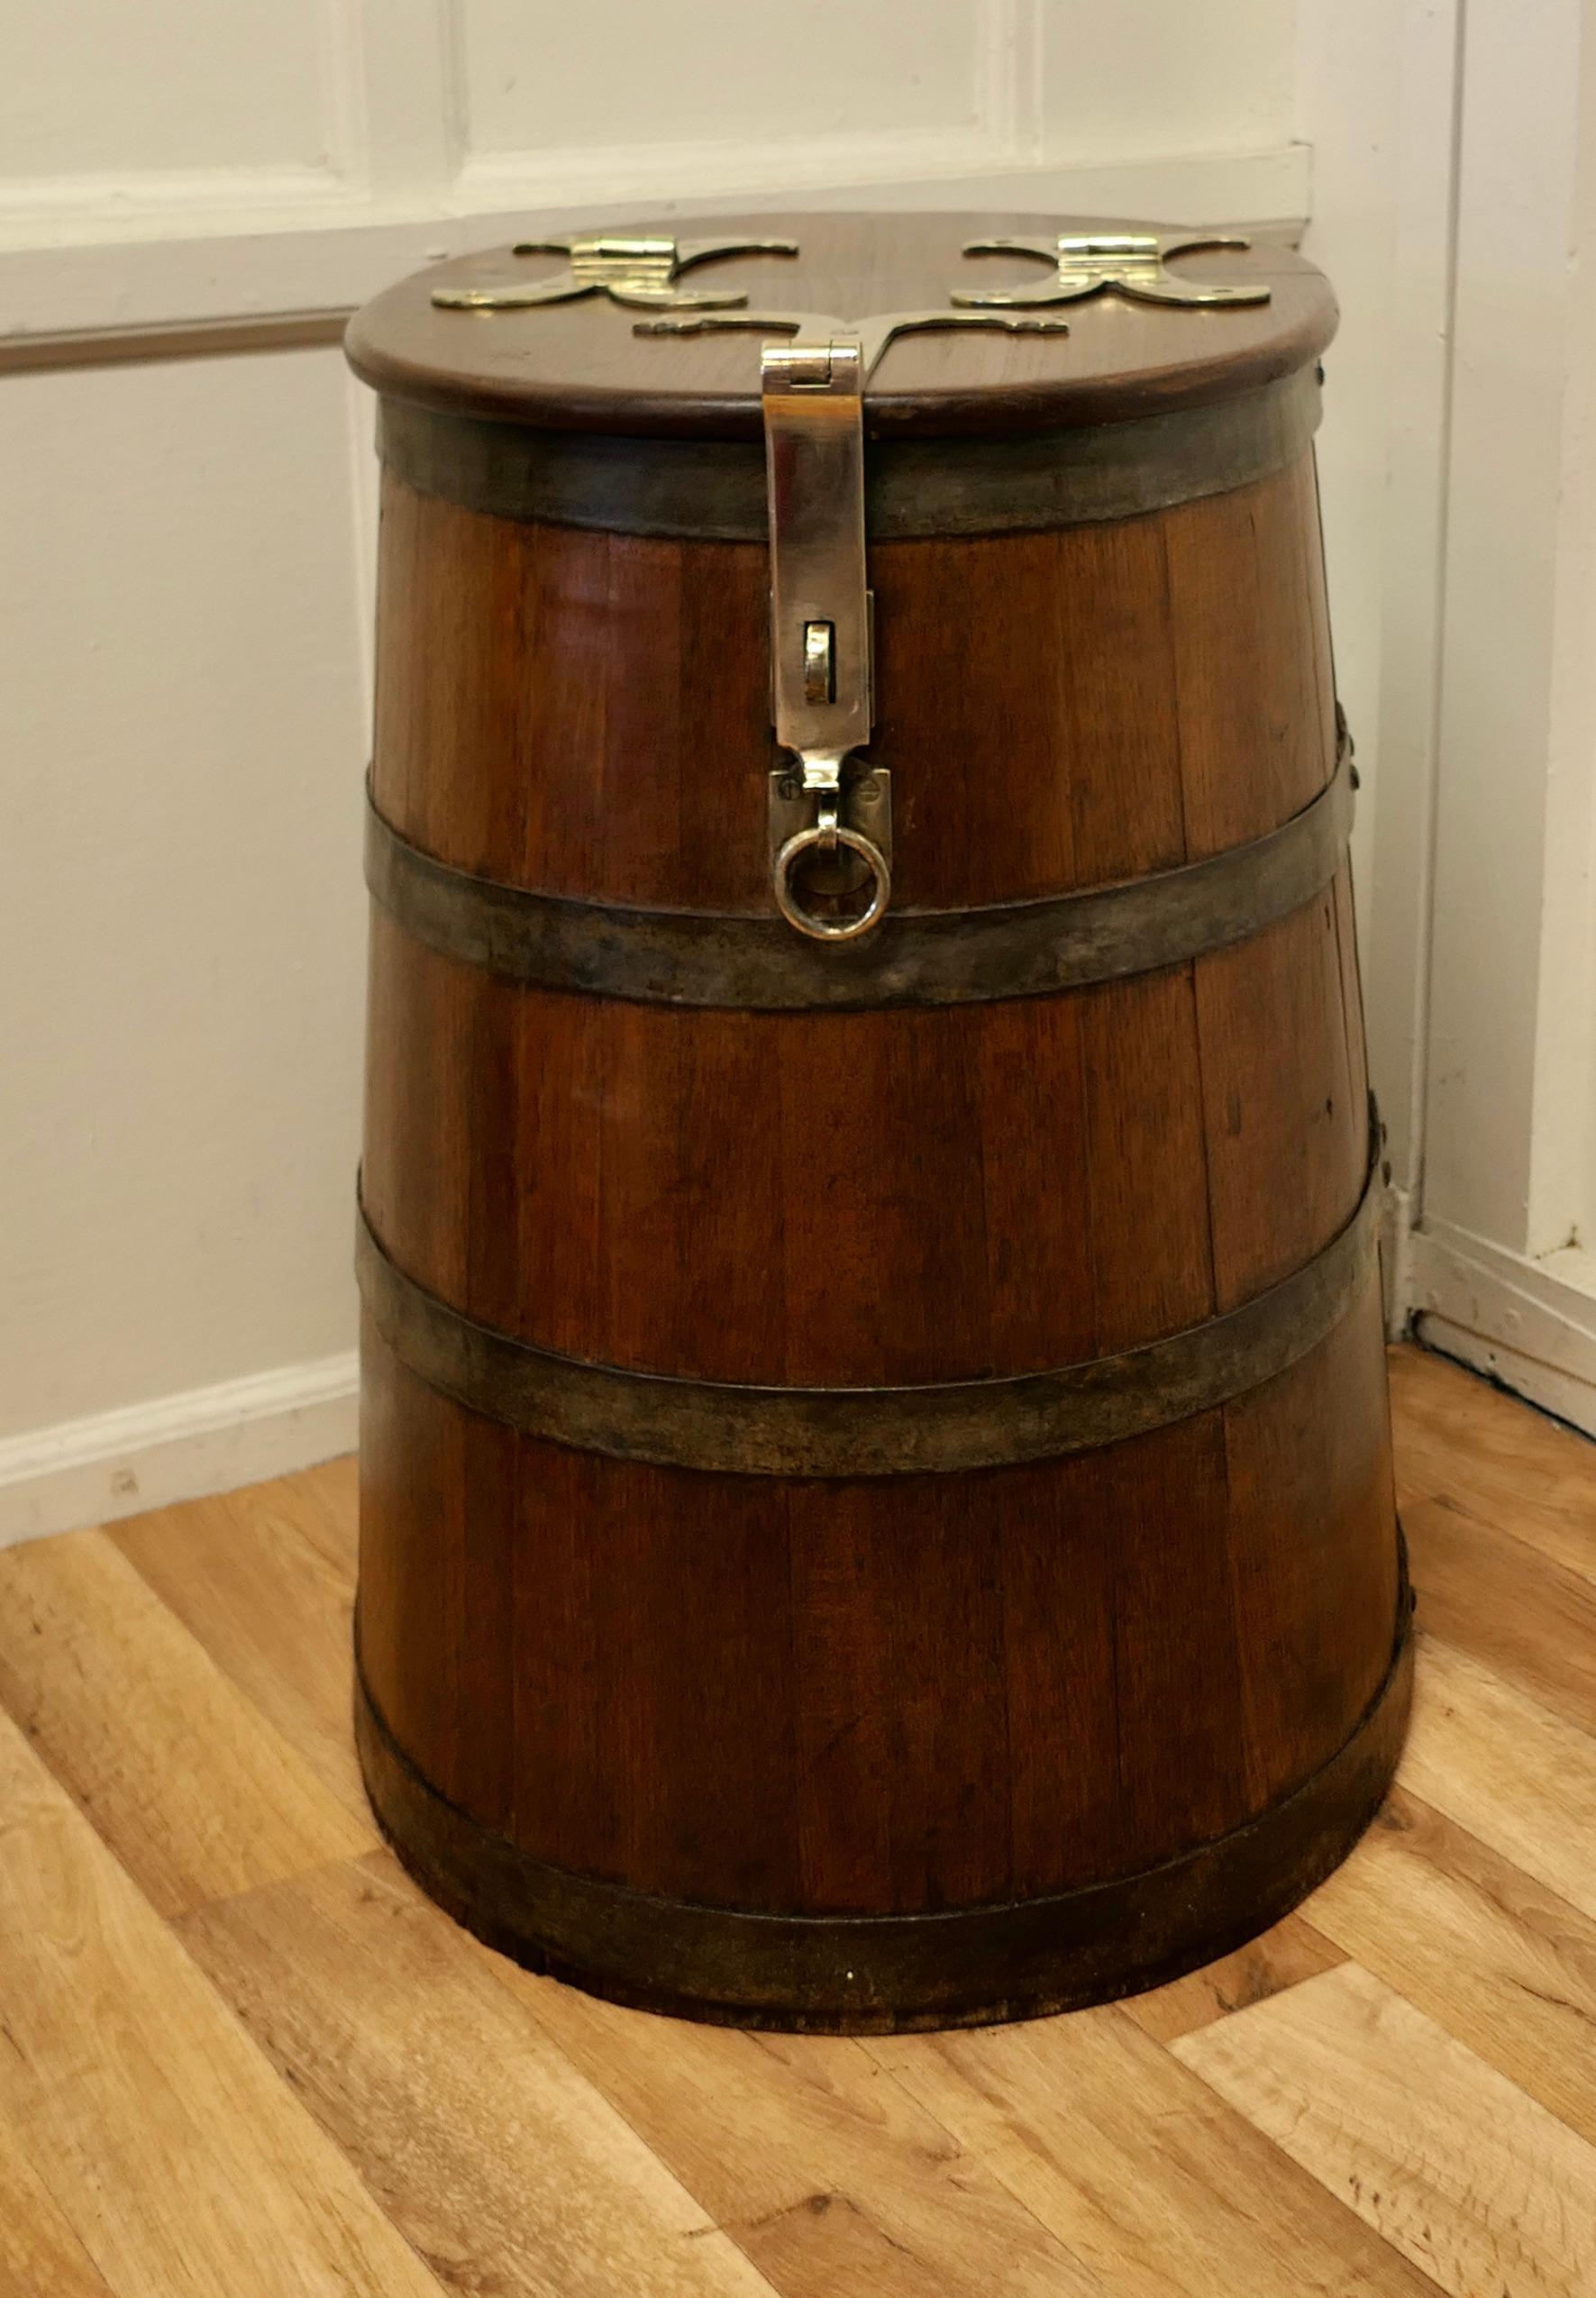 19th Century Ships Salt Beef Barrel, Oak and Brass Ships Storage Tub

A survivor from the 18th Century, this excellent piece would have been used for storing “Salt Beef” the only way at this time that meat could be stored for life at sea

The